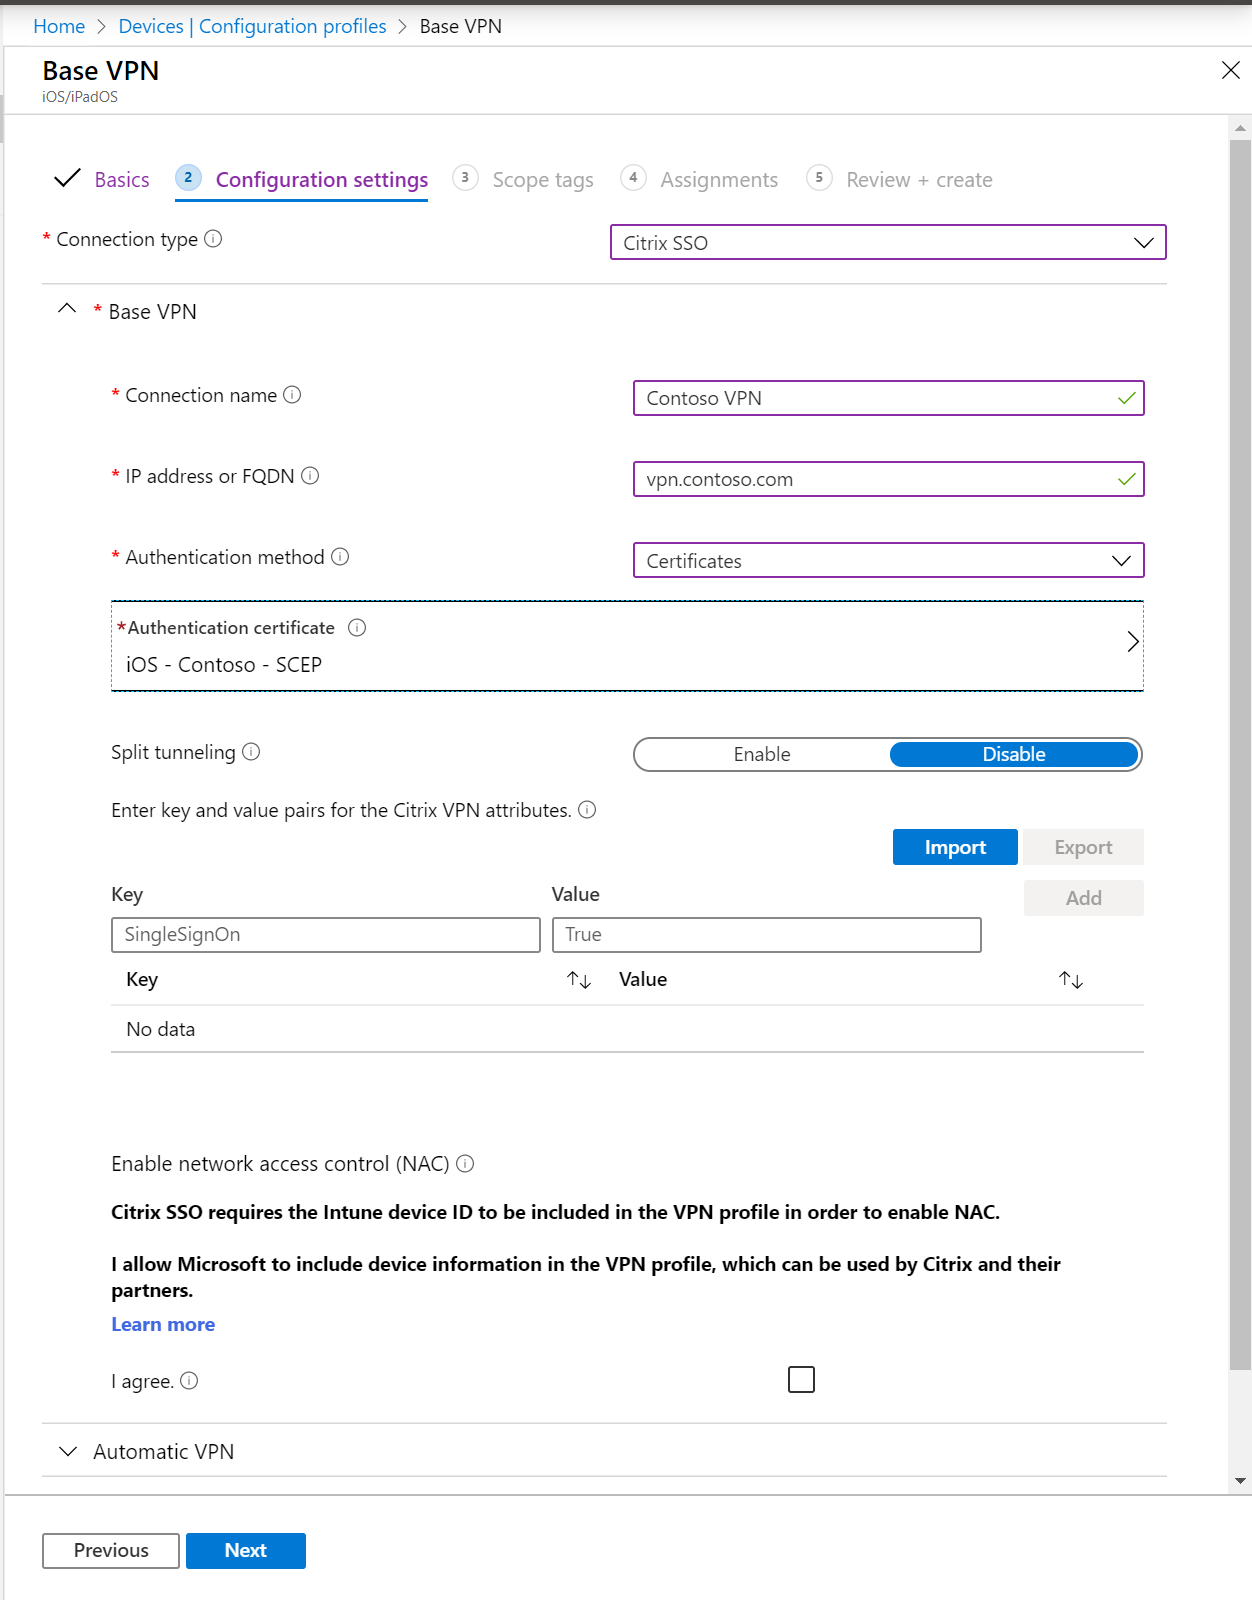 In a per-app VPN profile, enter a connection, IP address or FQDN, authentication method, and split tunneling in Microsoft Intune and Endpoint Manager admin center.